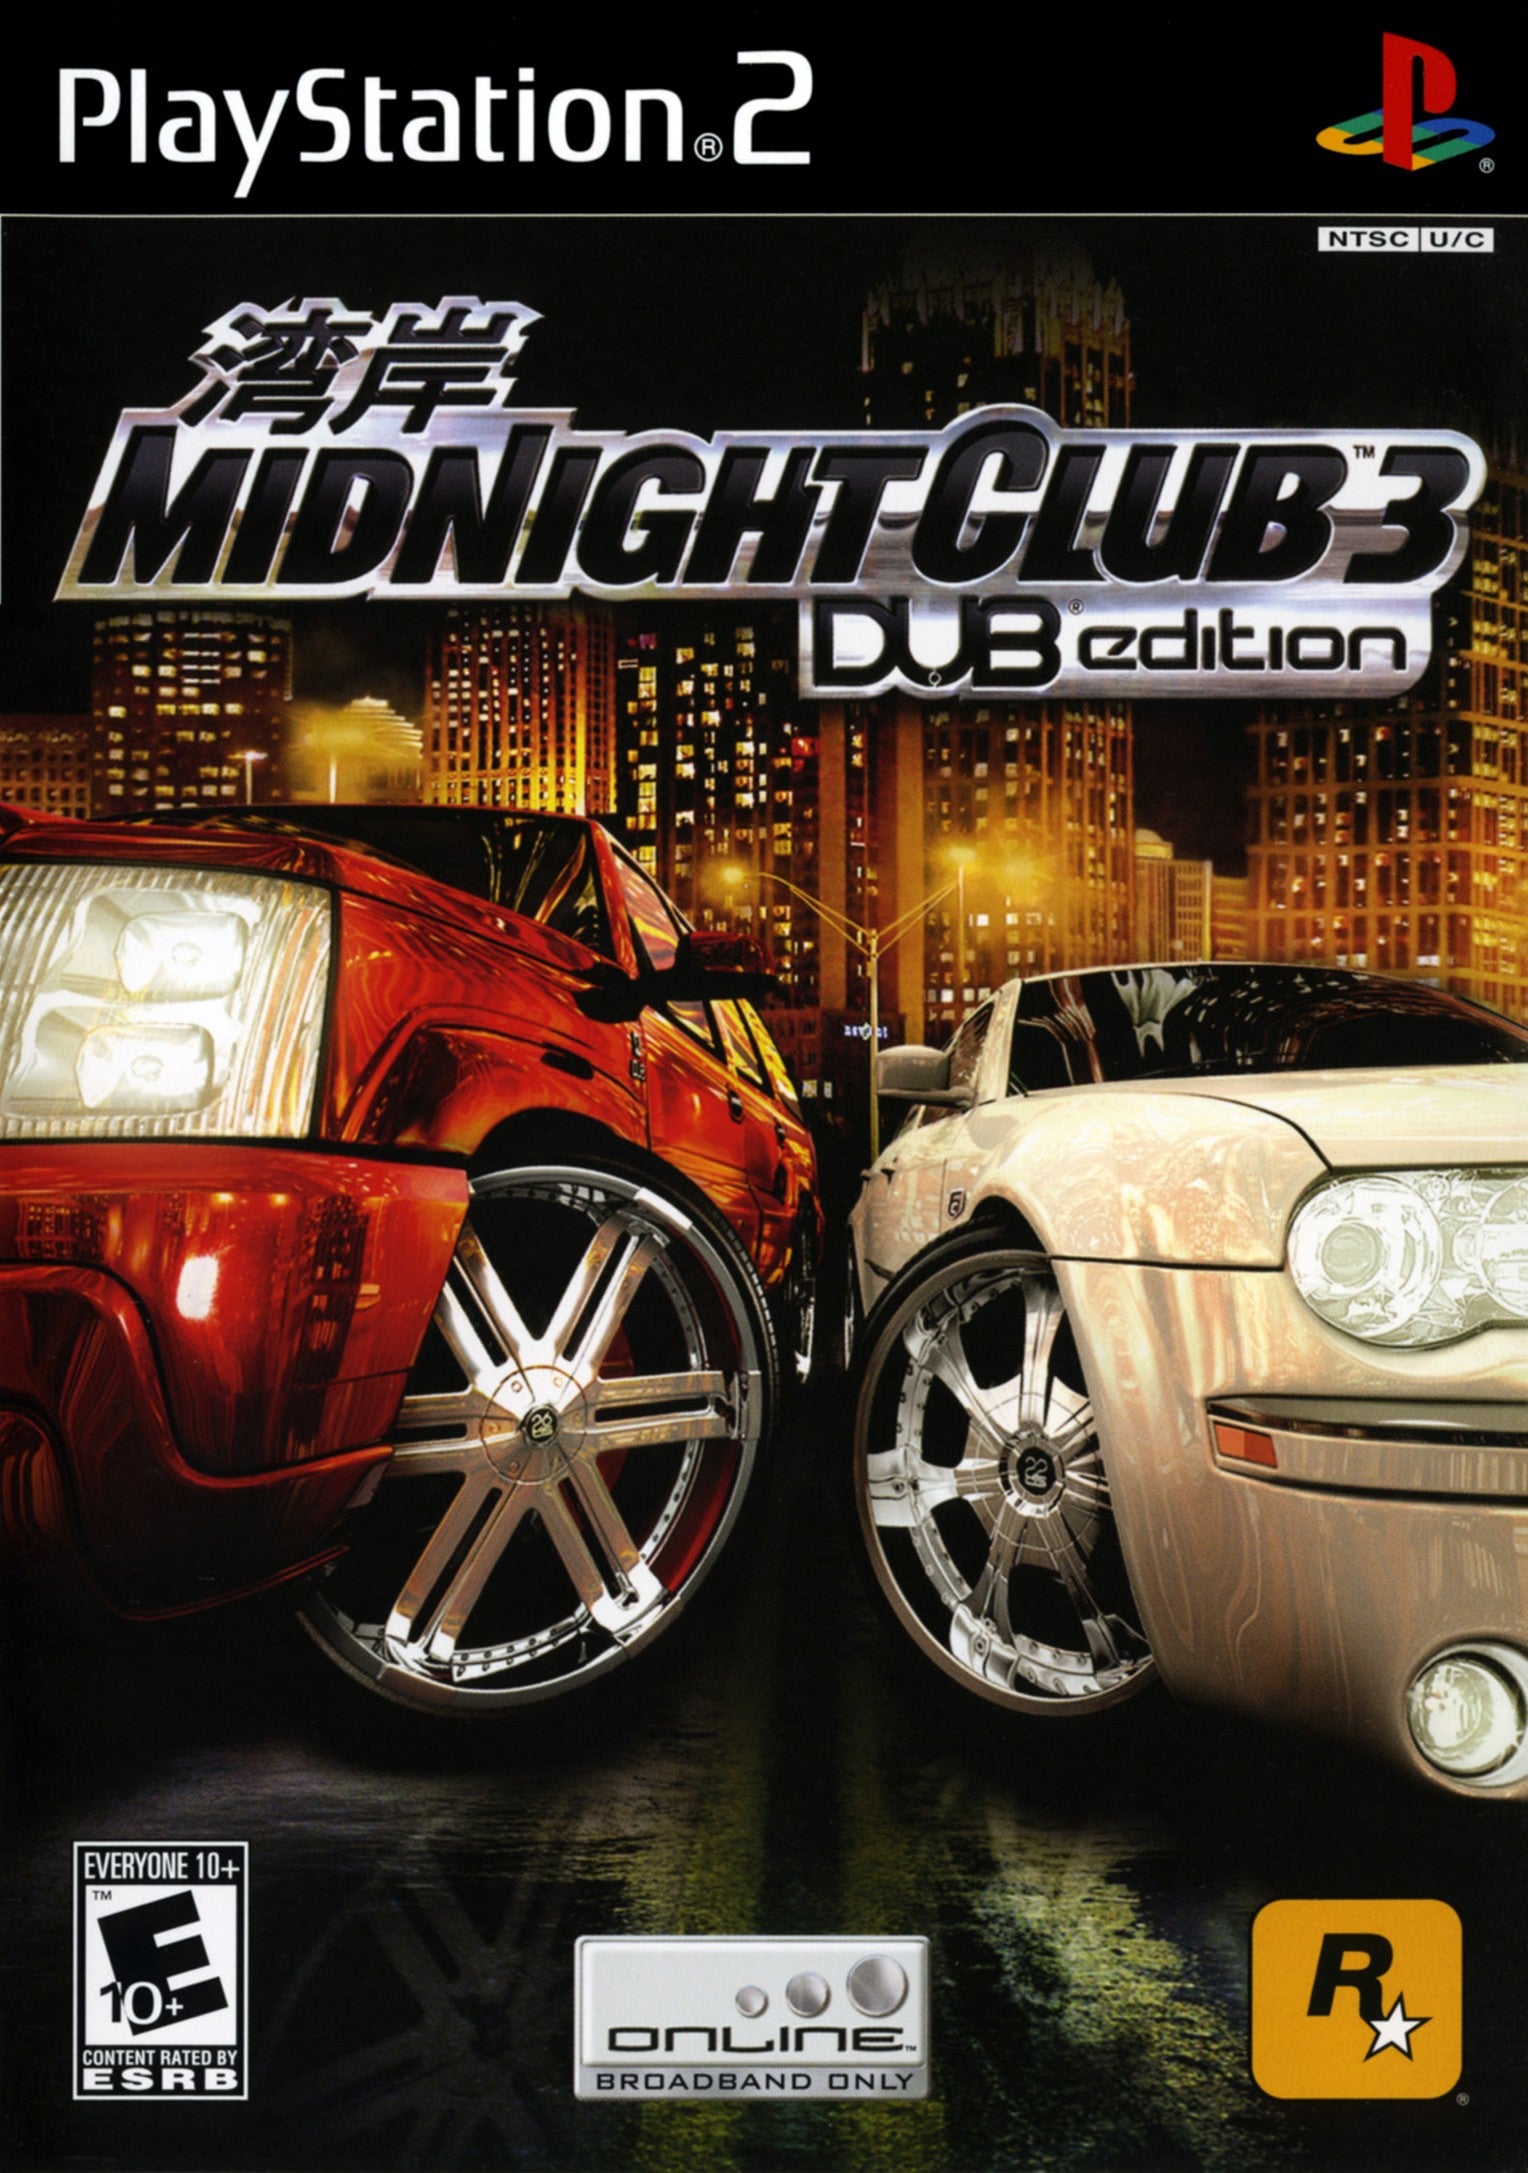 Midnight Club 3: DUB Edition - PlayStation 2 (PS2) Game - YourGamingShop.com - Buy, Sell, Trade Video Games Online. 120 Day Warranty. Satisfaction Guaranteed.